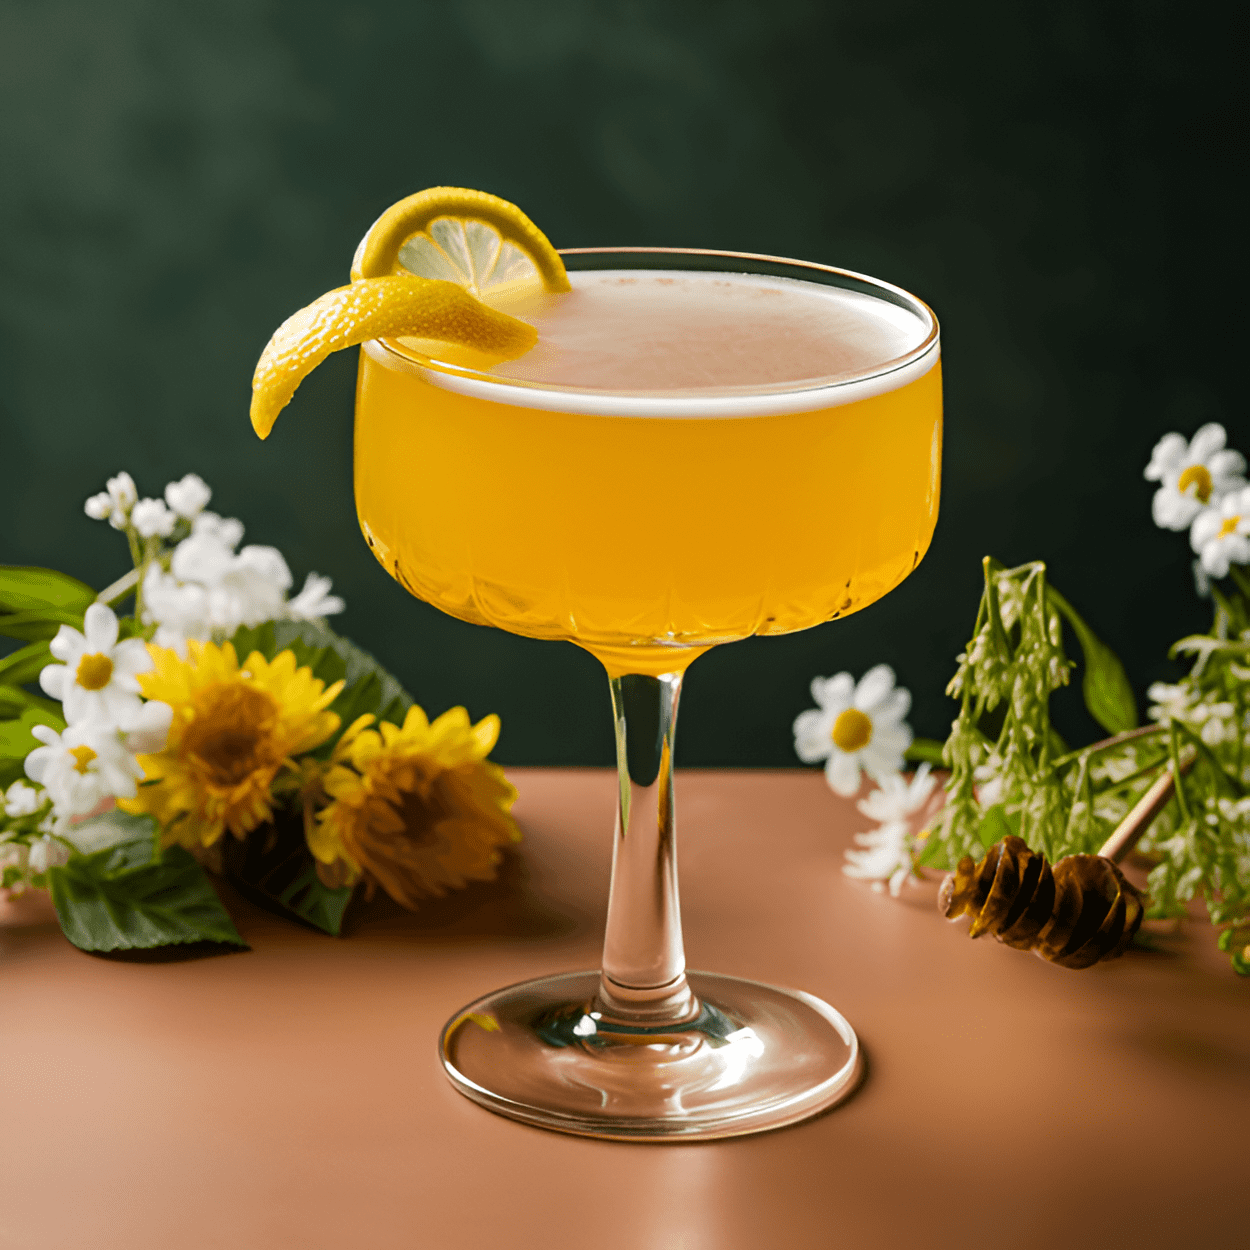 Honey Bee Cocktail Recipe - The Honey Bee cocktail offers a delightful balance of sweet, sour, and floral flavors. The honey lends a rich, velvety sweetness, while the lemon juice provides a bright, tangy contrast. The rum adds warmth and depth, making this cocktail both refreshing and satisfying.